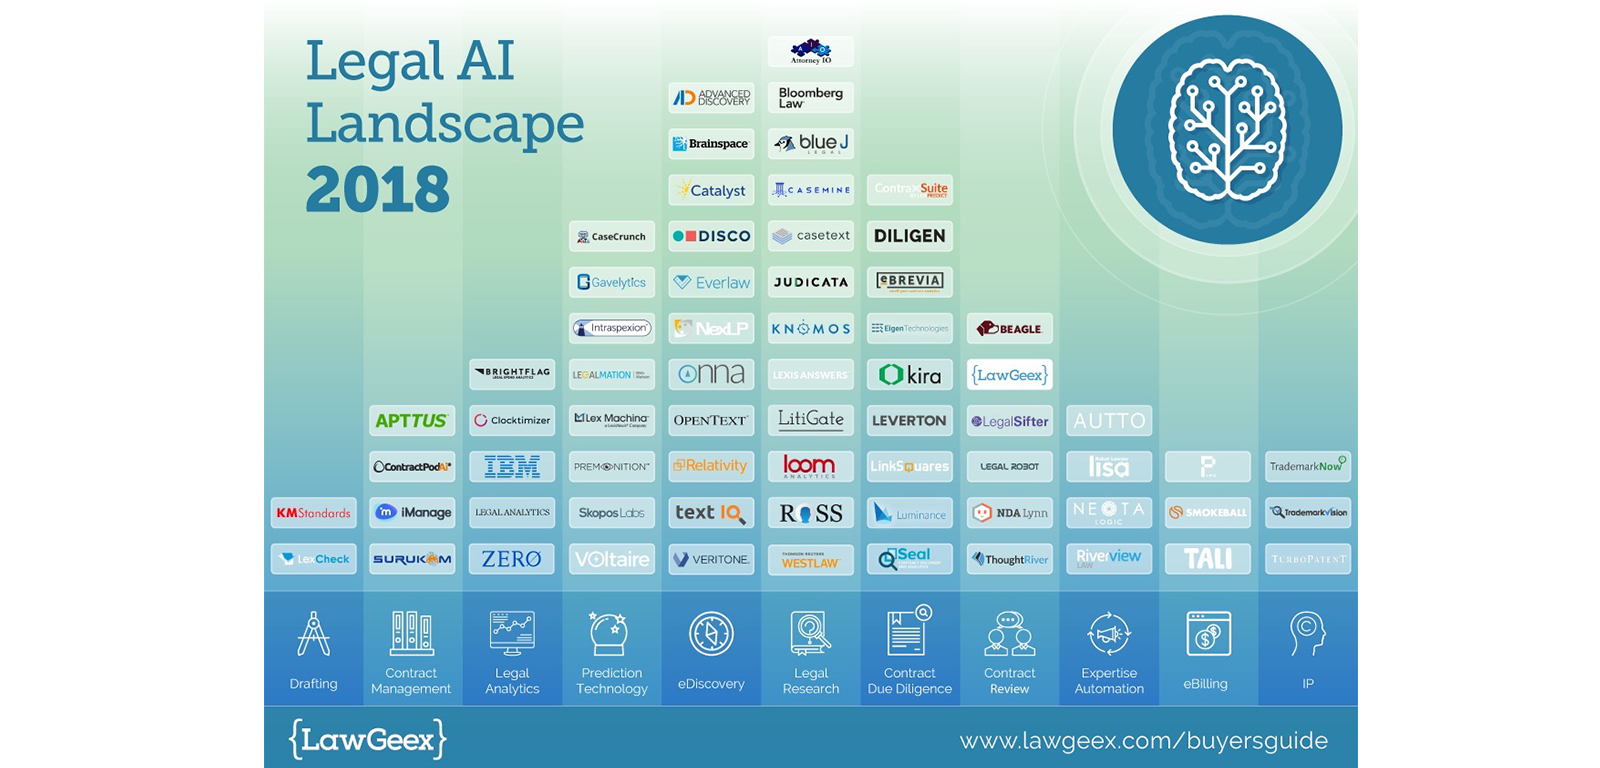 Lawgeex Legal AI Landscape https://blog.lawgeex.com/3-charts-that-show-the-unstoppable-growth-of-legal-tech/legal-ai-landscape-lgeex/